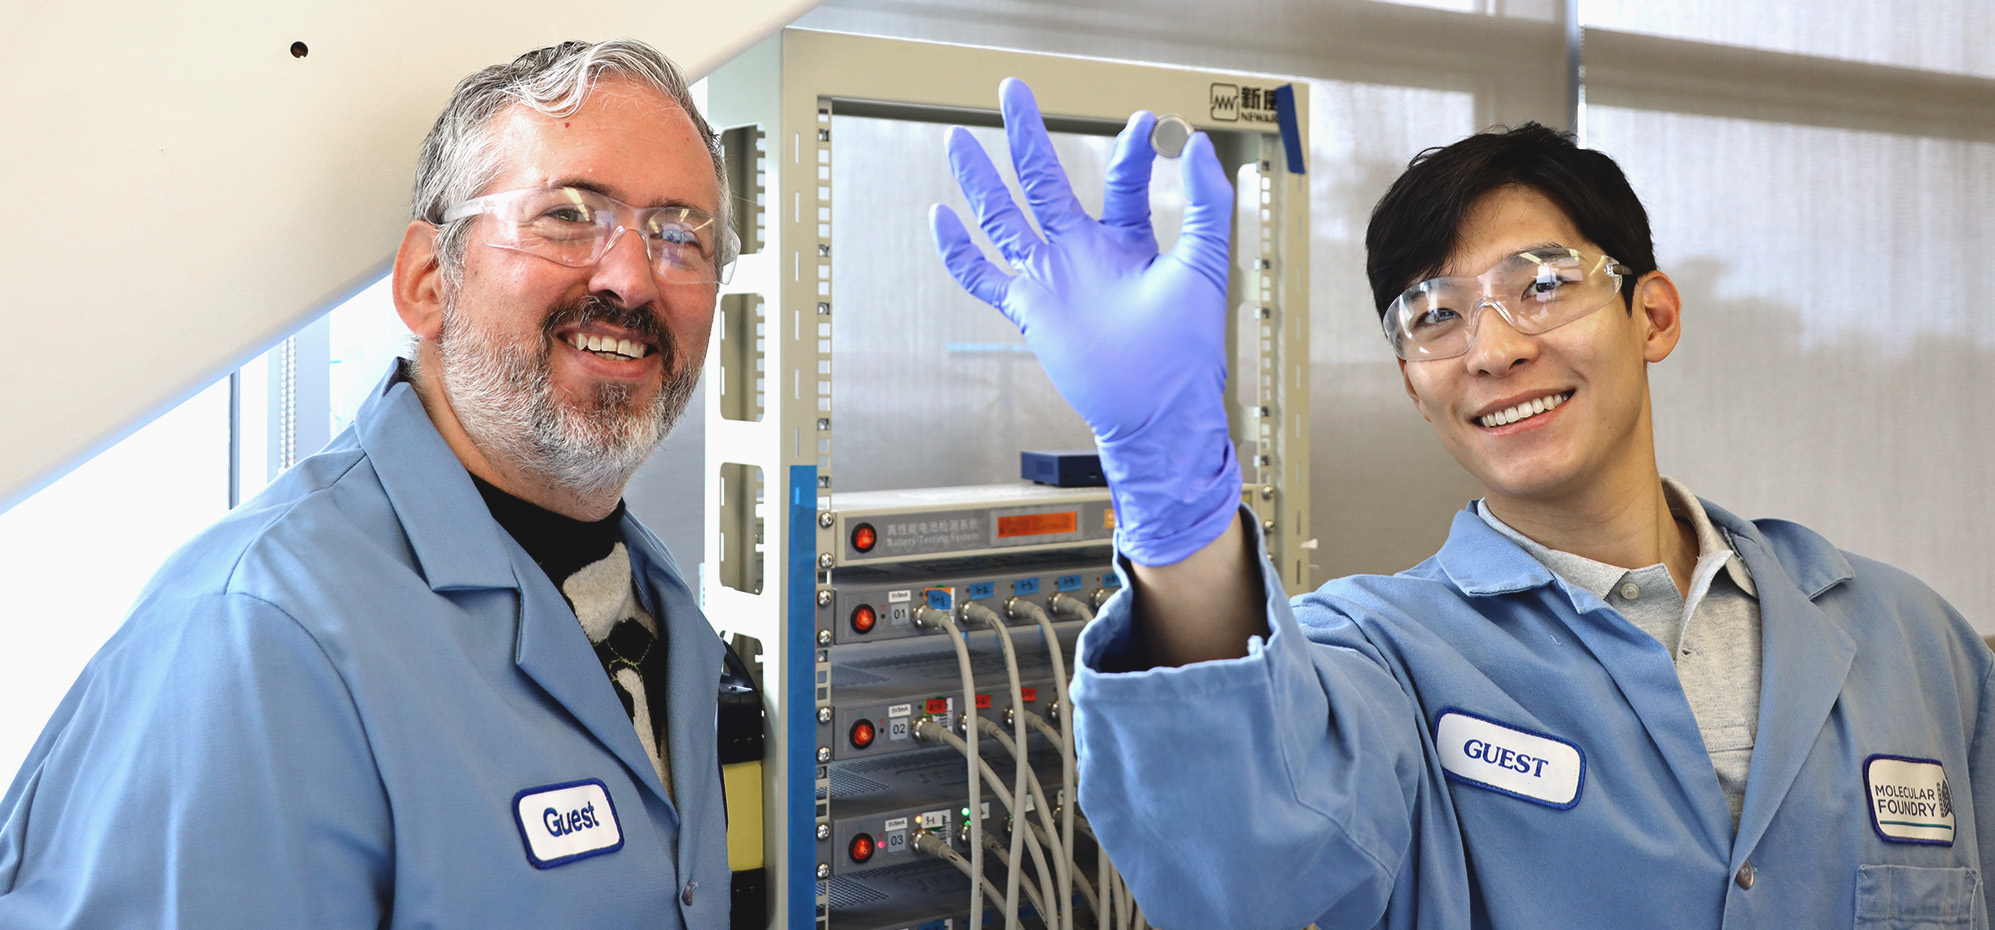 Two smiling people in blue lab coats and safety glasses. The person on the right has their arm raised in the center of the frame presenting a nickel-sized sample.